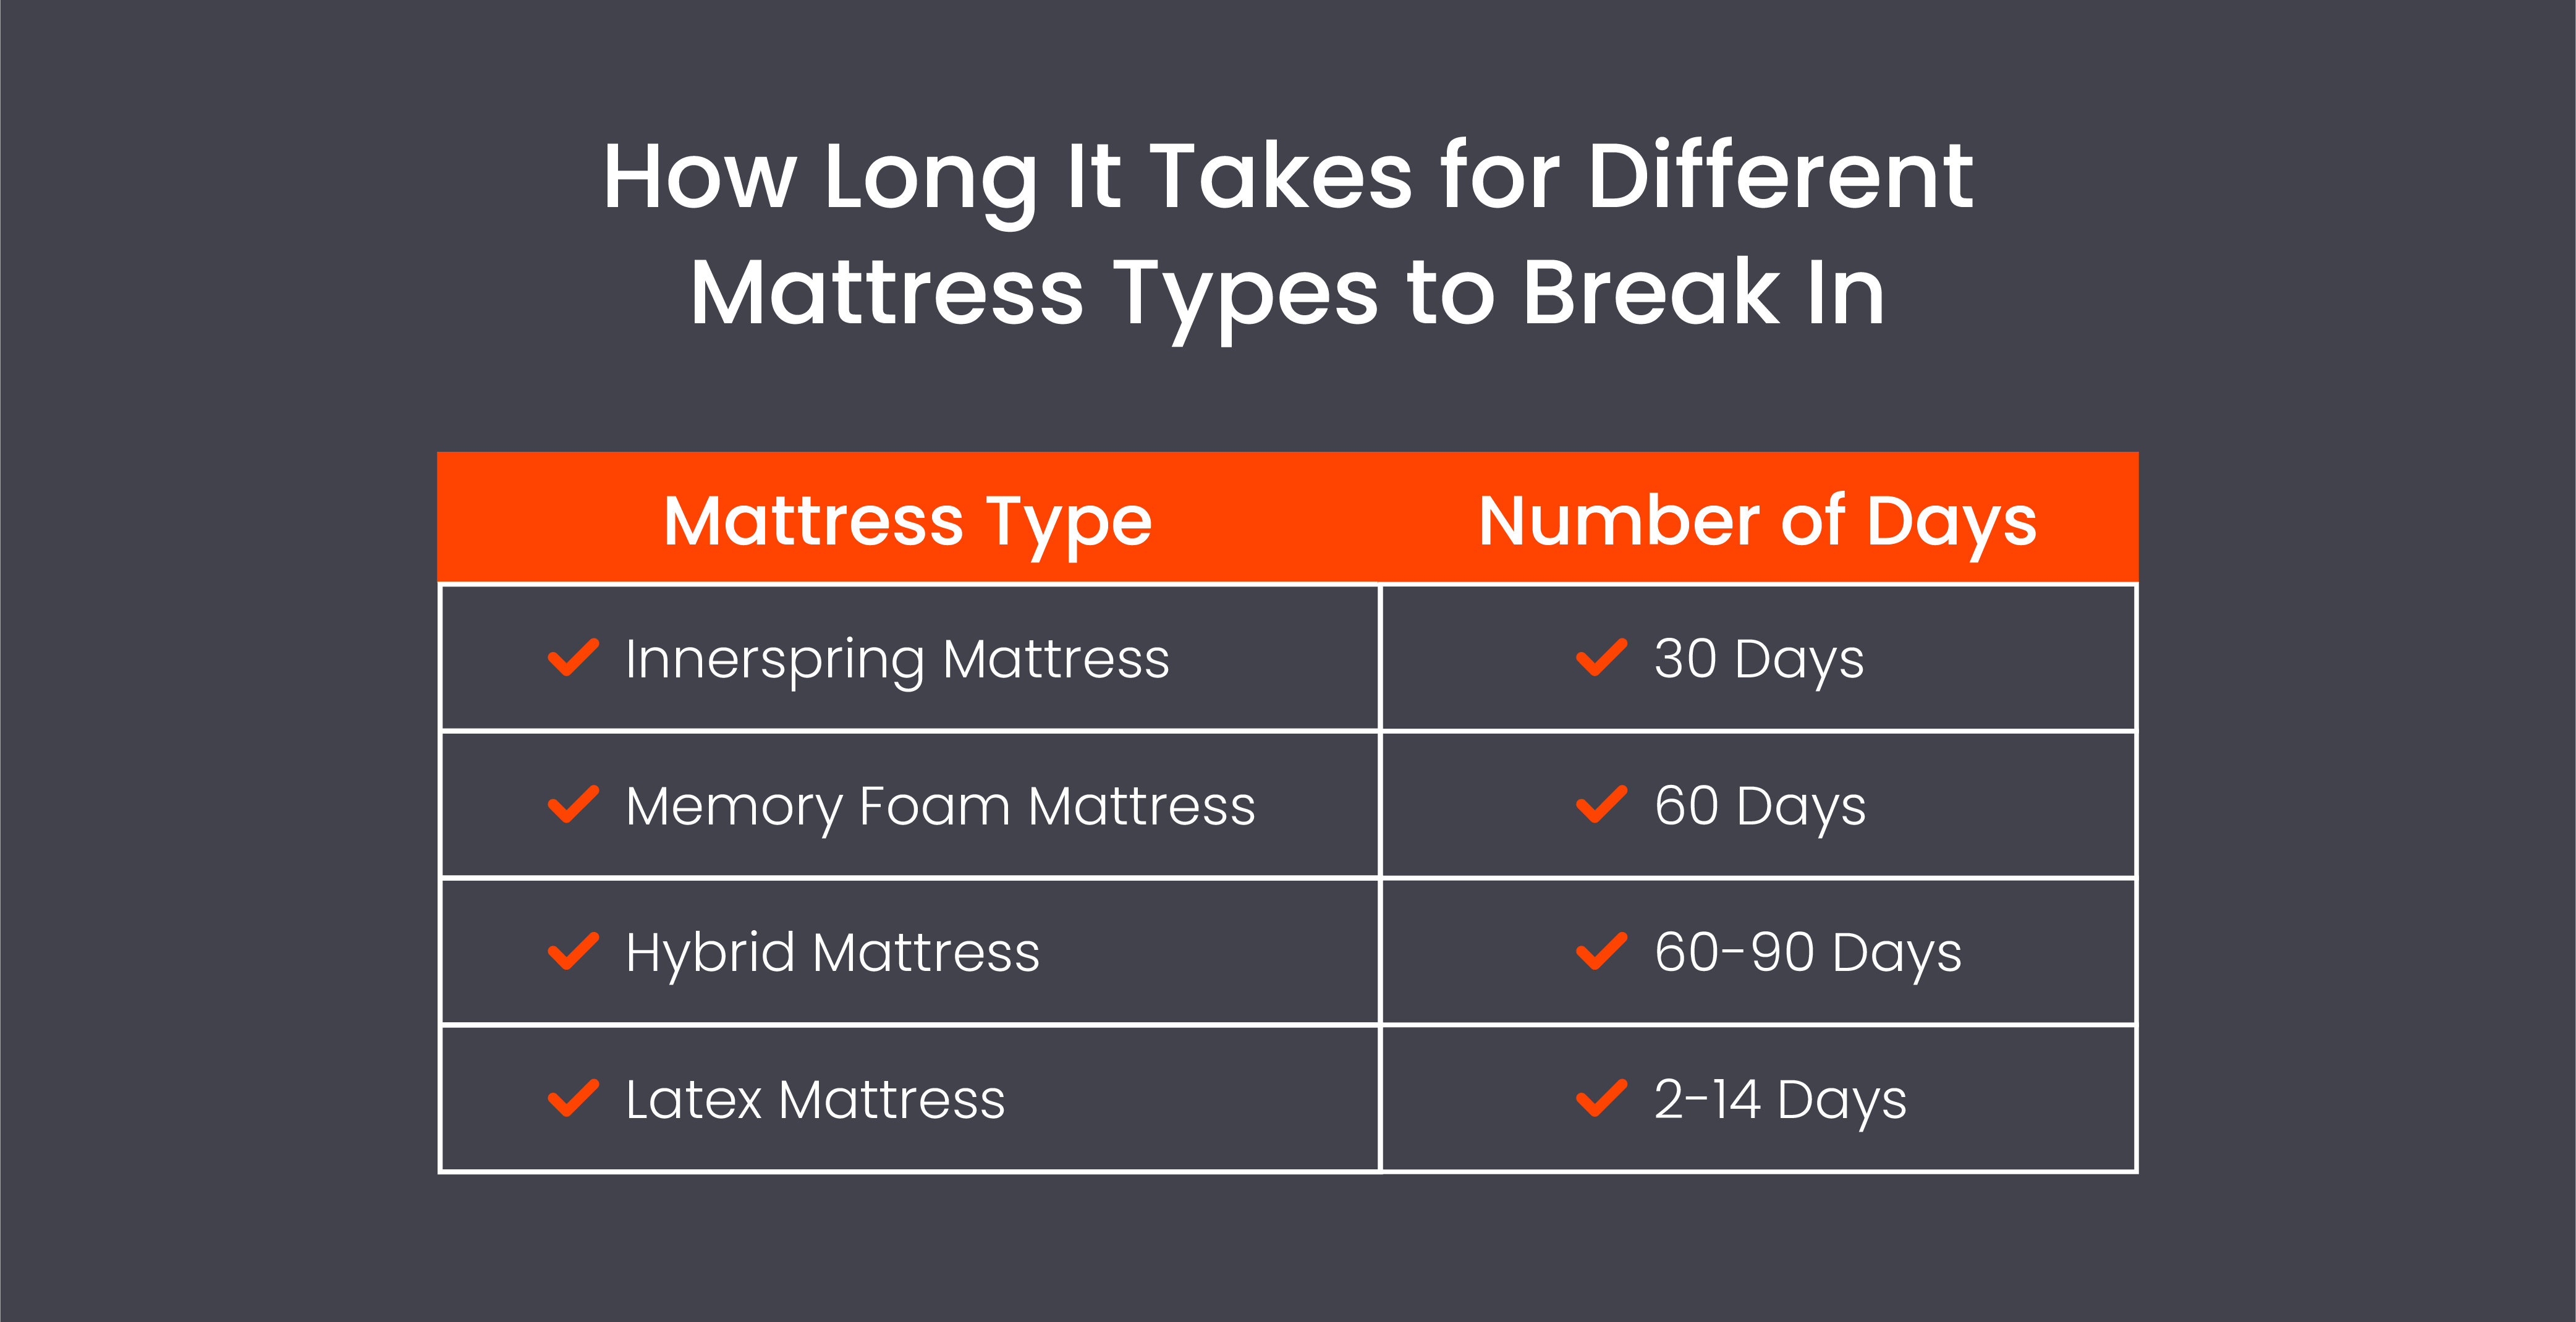 How long it takes for different mattress types to break in